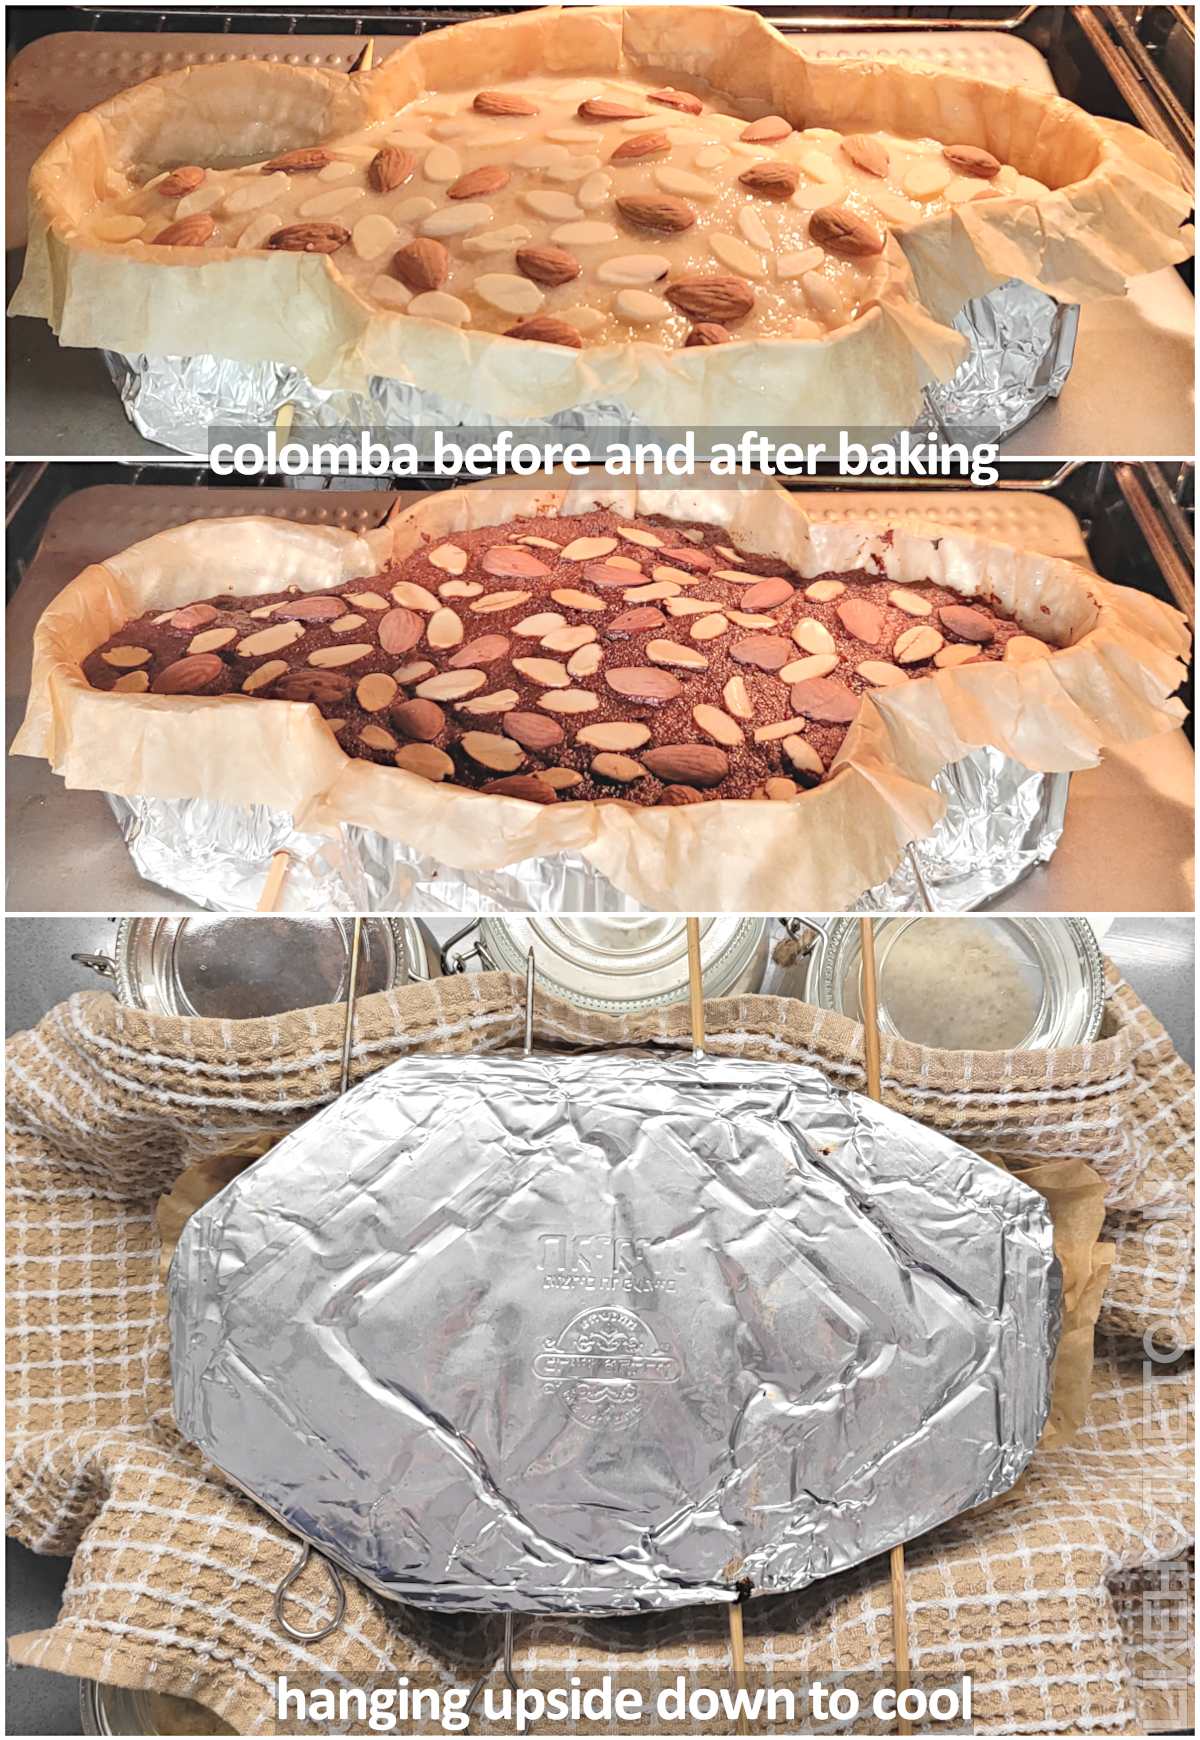 Keto colomba in the oven, before and after baking, and hanging upside down to cool supported by six mason jars.